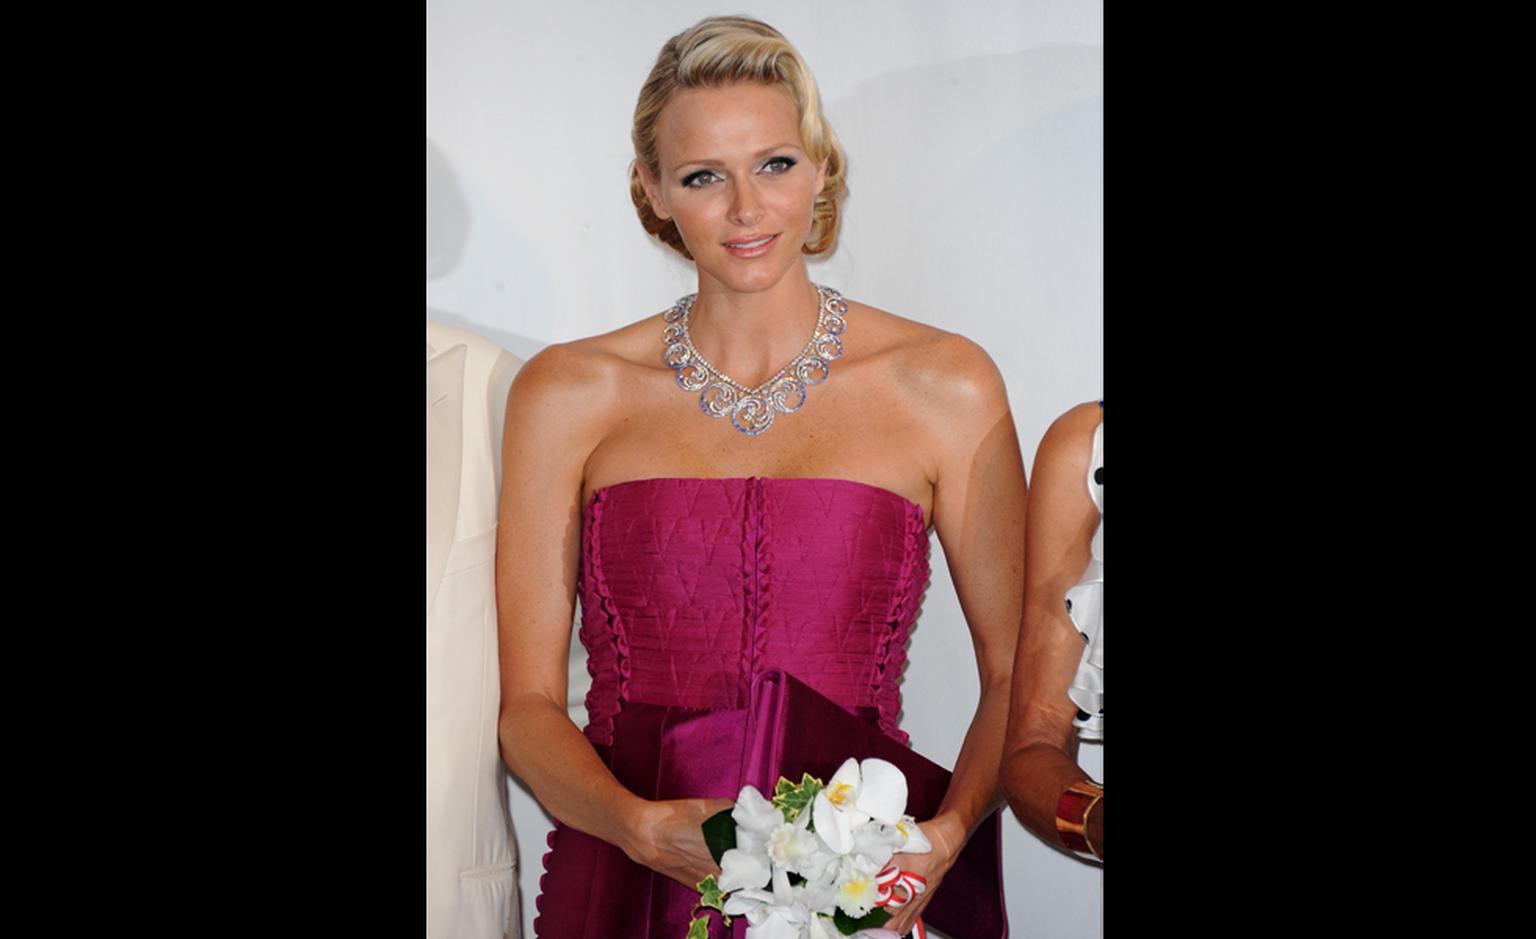 Van Cleef Arpels necklace Royal Gift from the Prince to the Princess. Red Cross Ball 2011 in Monaco.